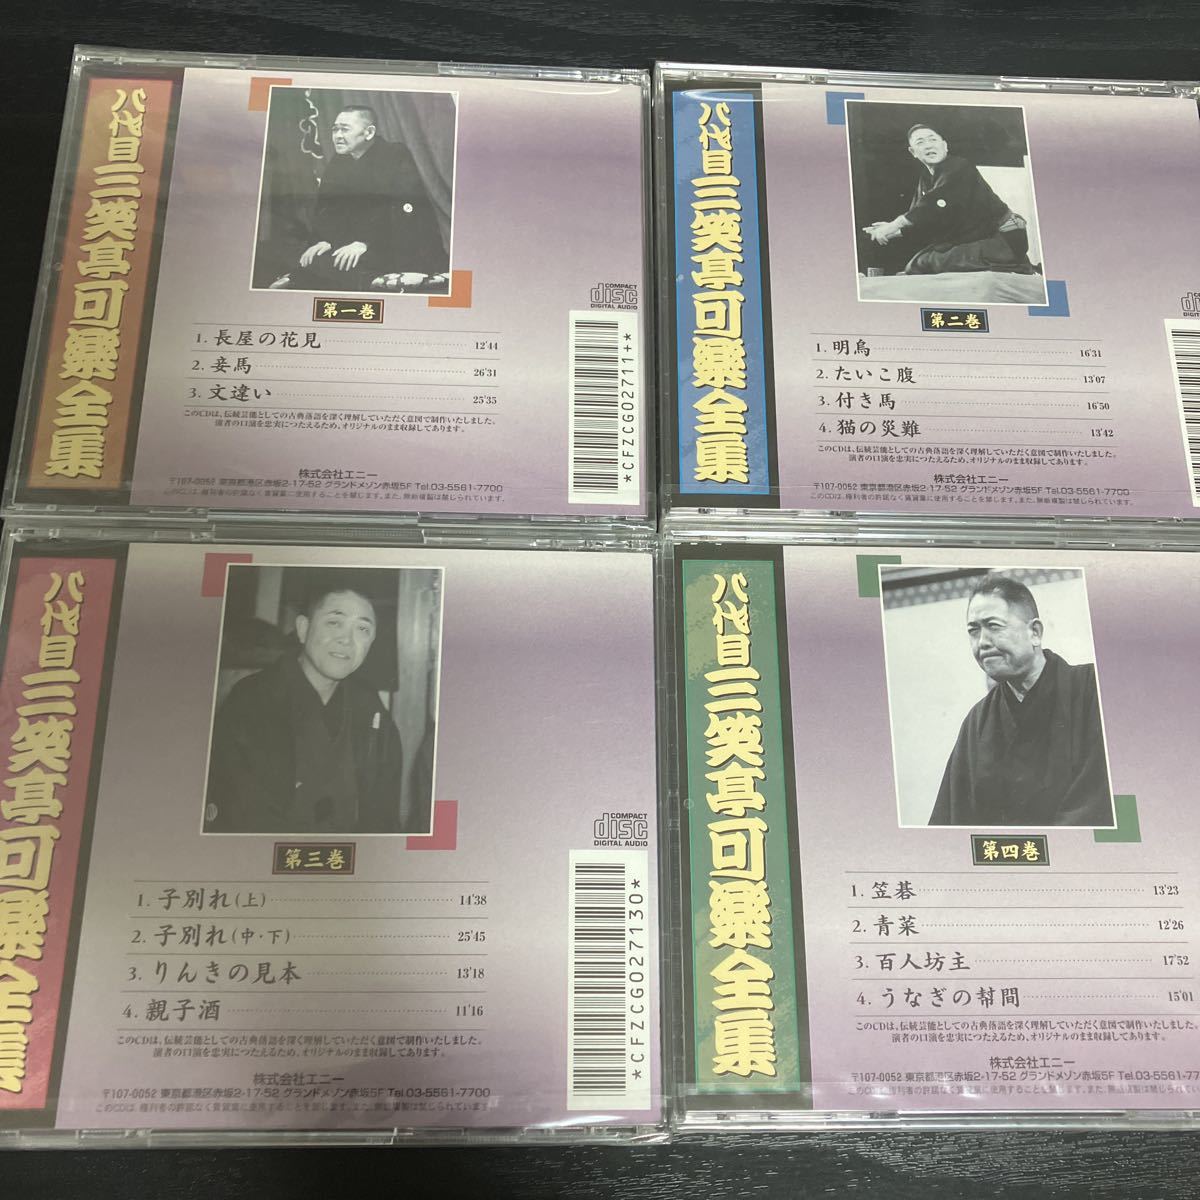 . generation three laughing . possible comfort complete set of works 10 sheets set new goods unopened equipped * free shipping 